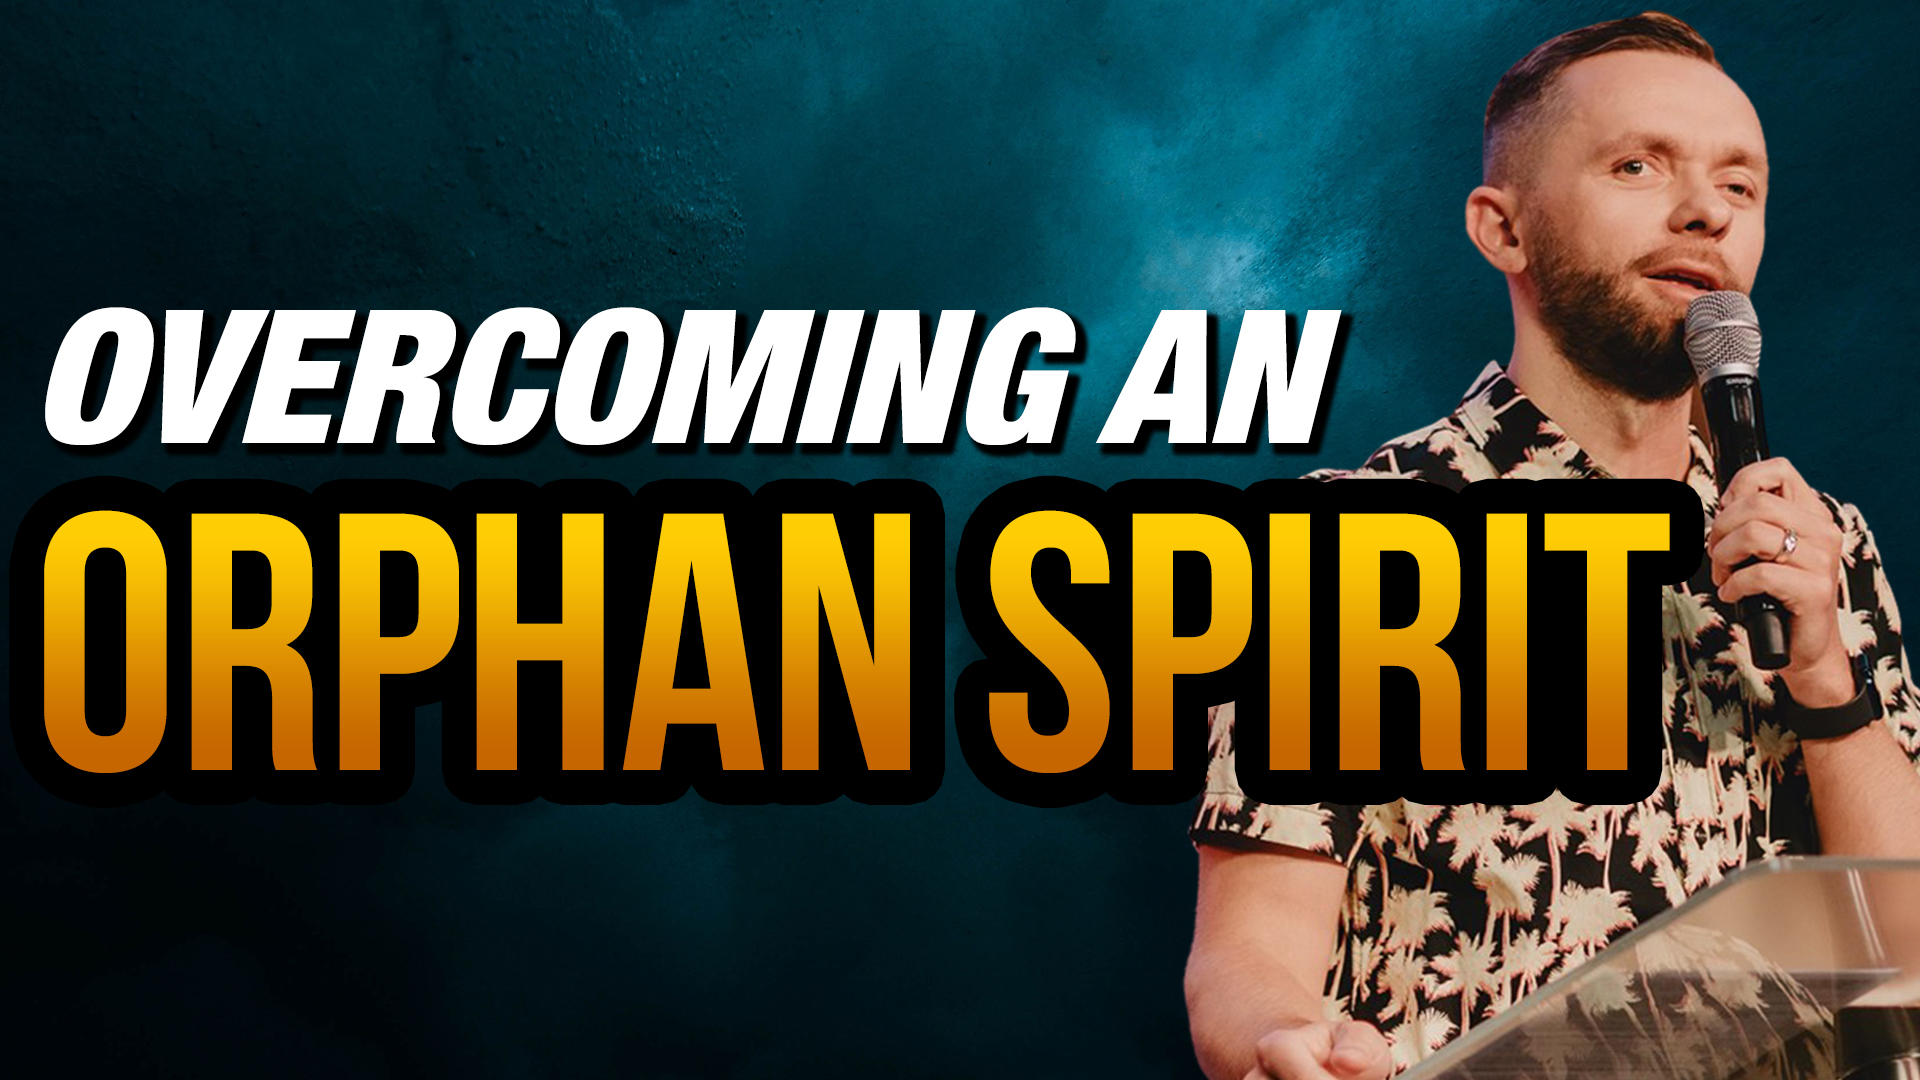 Featured image for “Overcoming an Orphan Spirit”